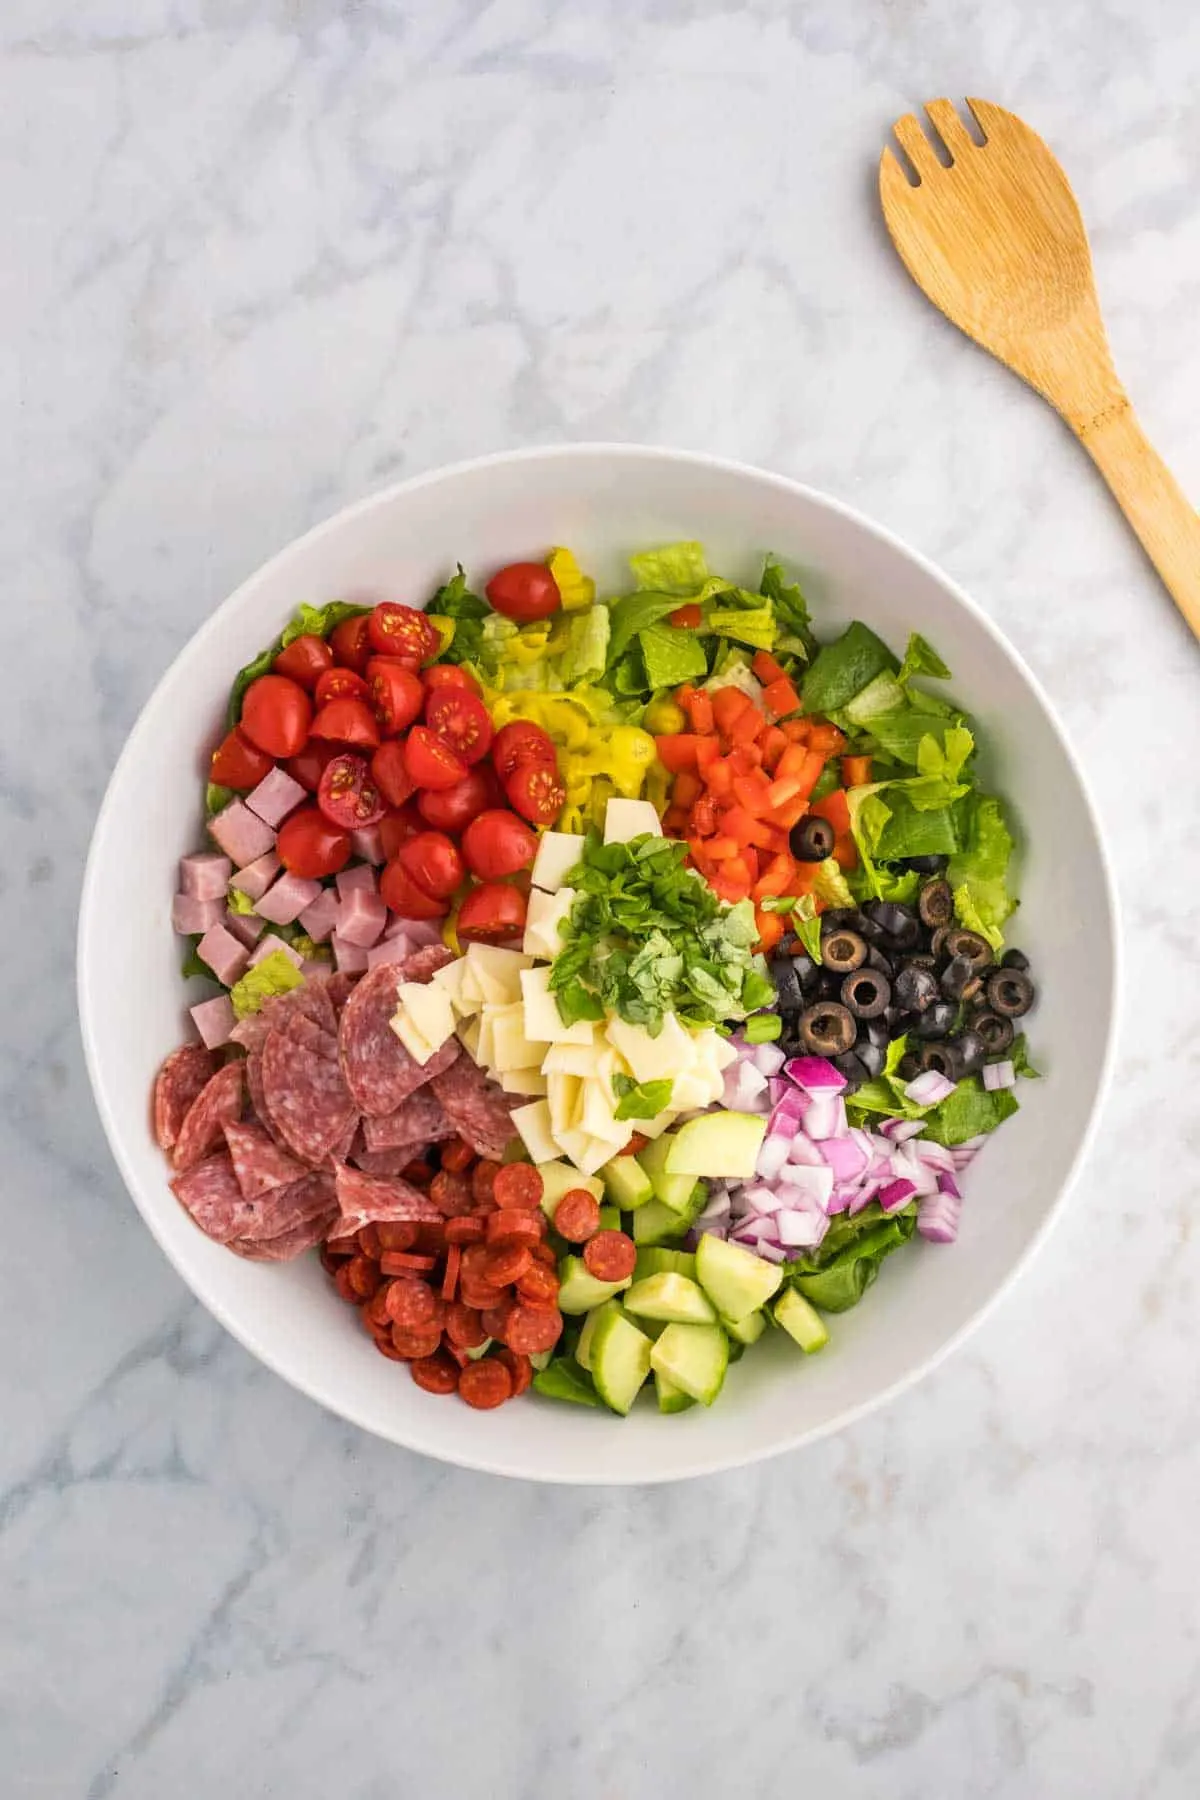 Italian sub salad ingredients in a large bowl